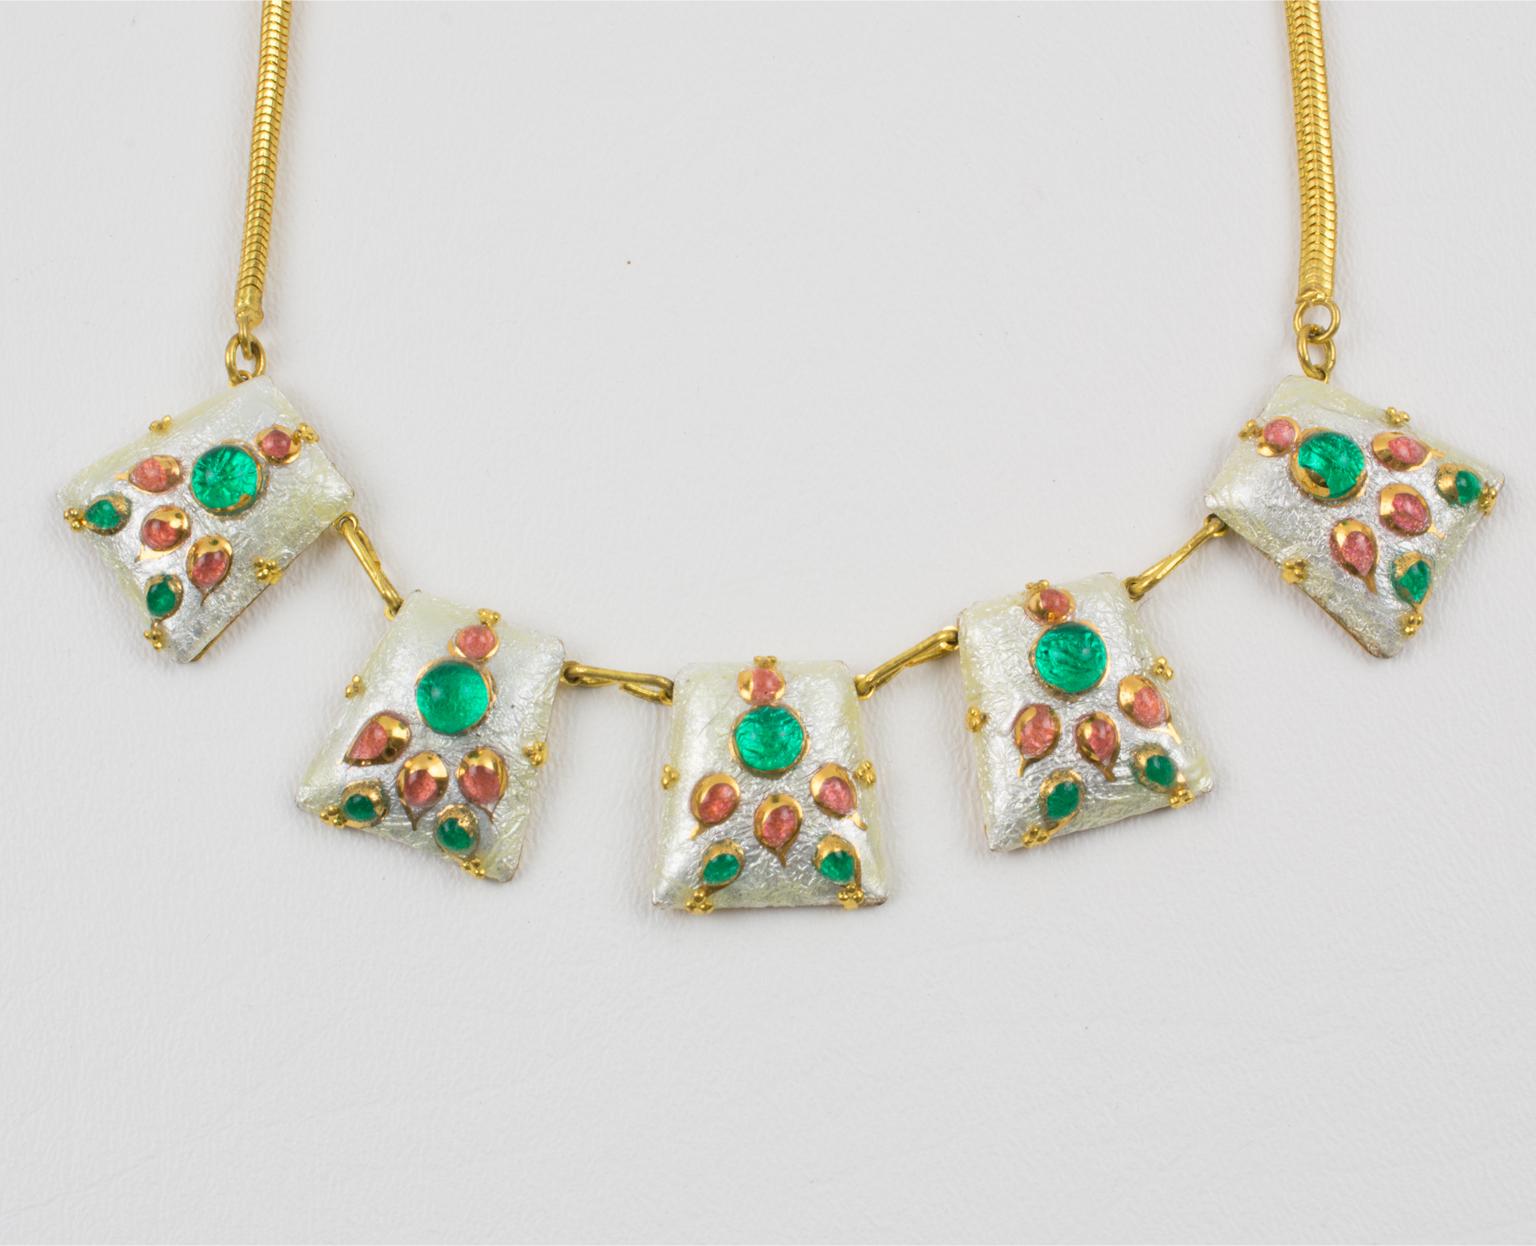 Limoges France White Enamel and Pate de Verre Link Necklace In Excellent Condition For Sale In Atlanta, GA